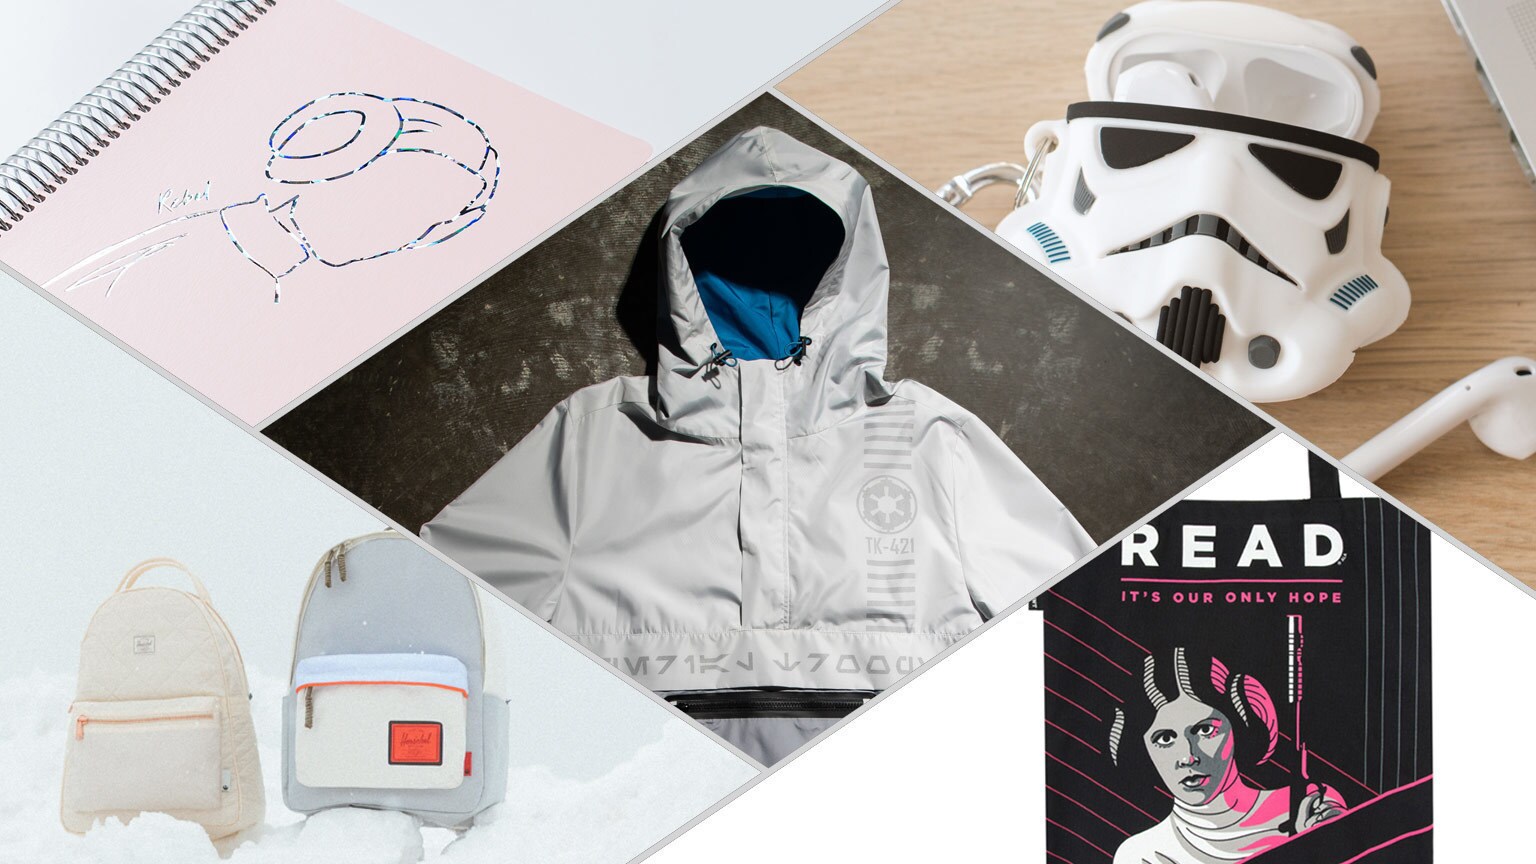 Star Wars Back-to-School Shopping Guide 2021